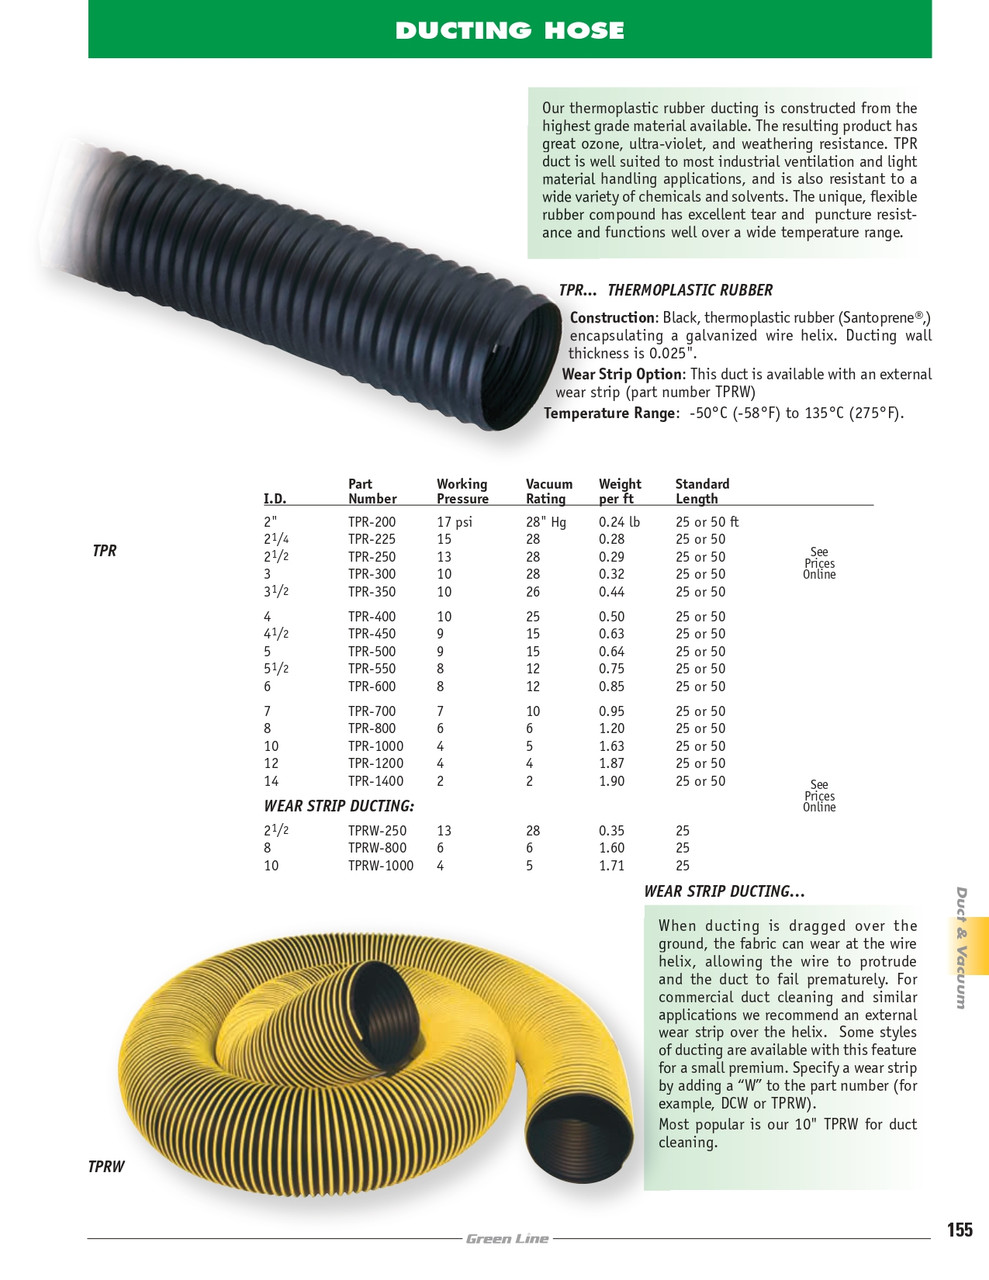 10" Thermoplastic Rubber Ducting Hose   TPR-1000